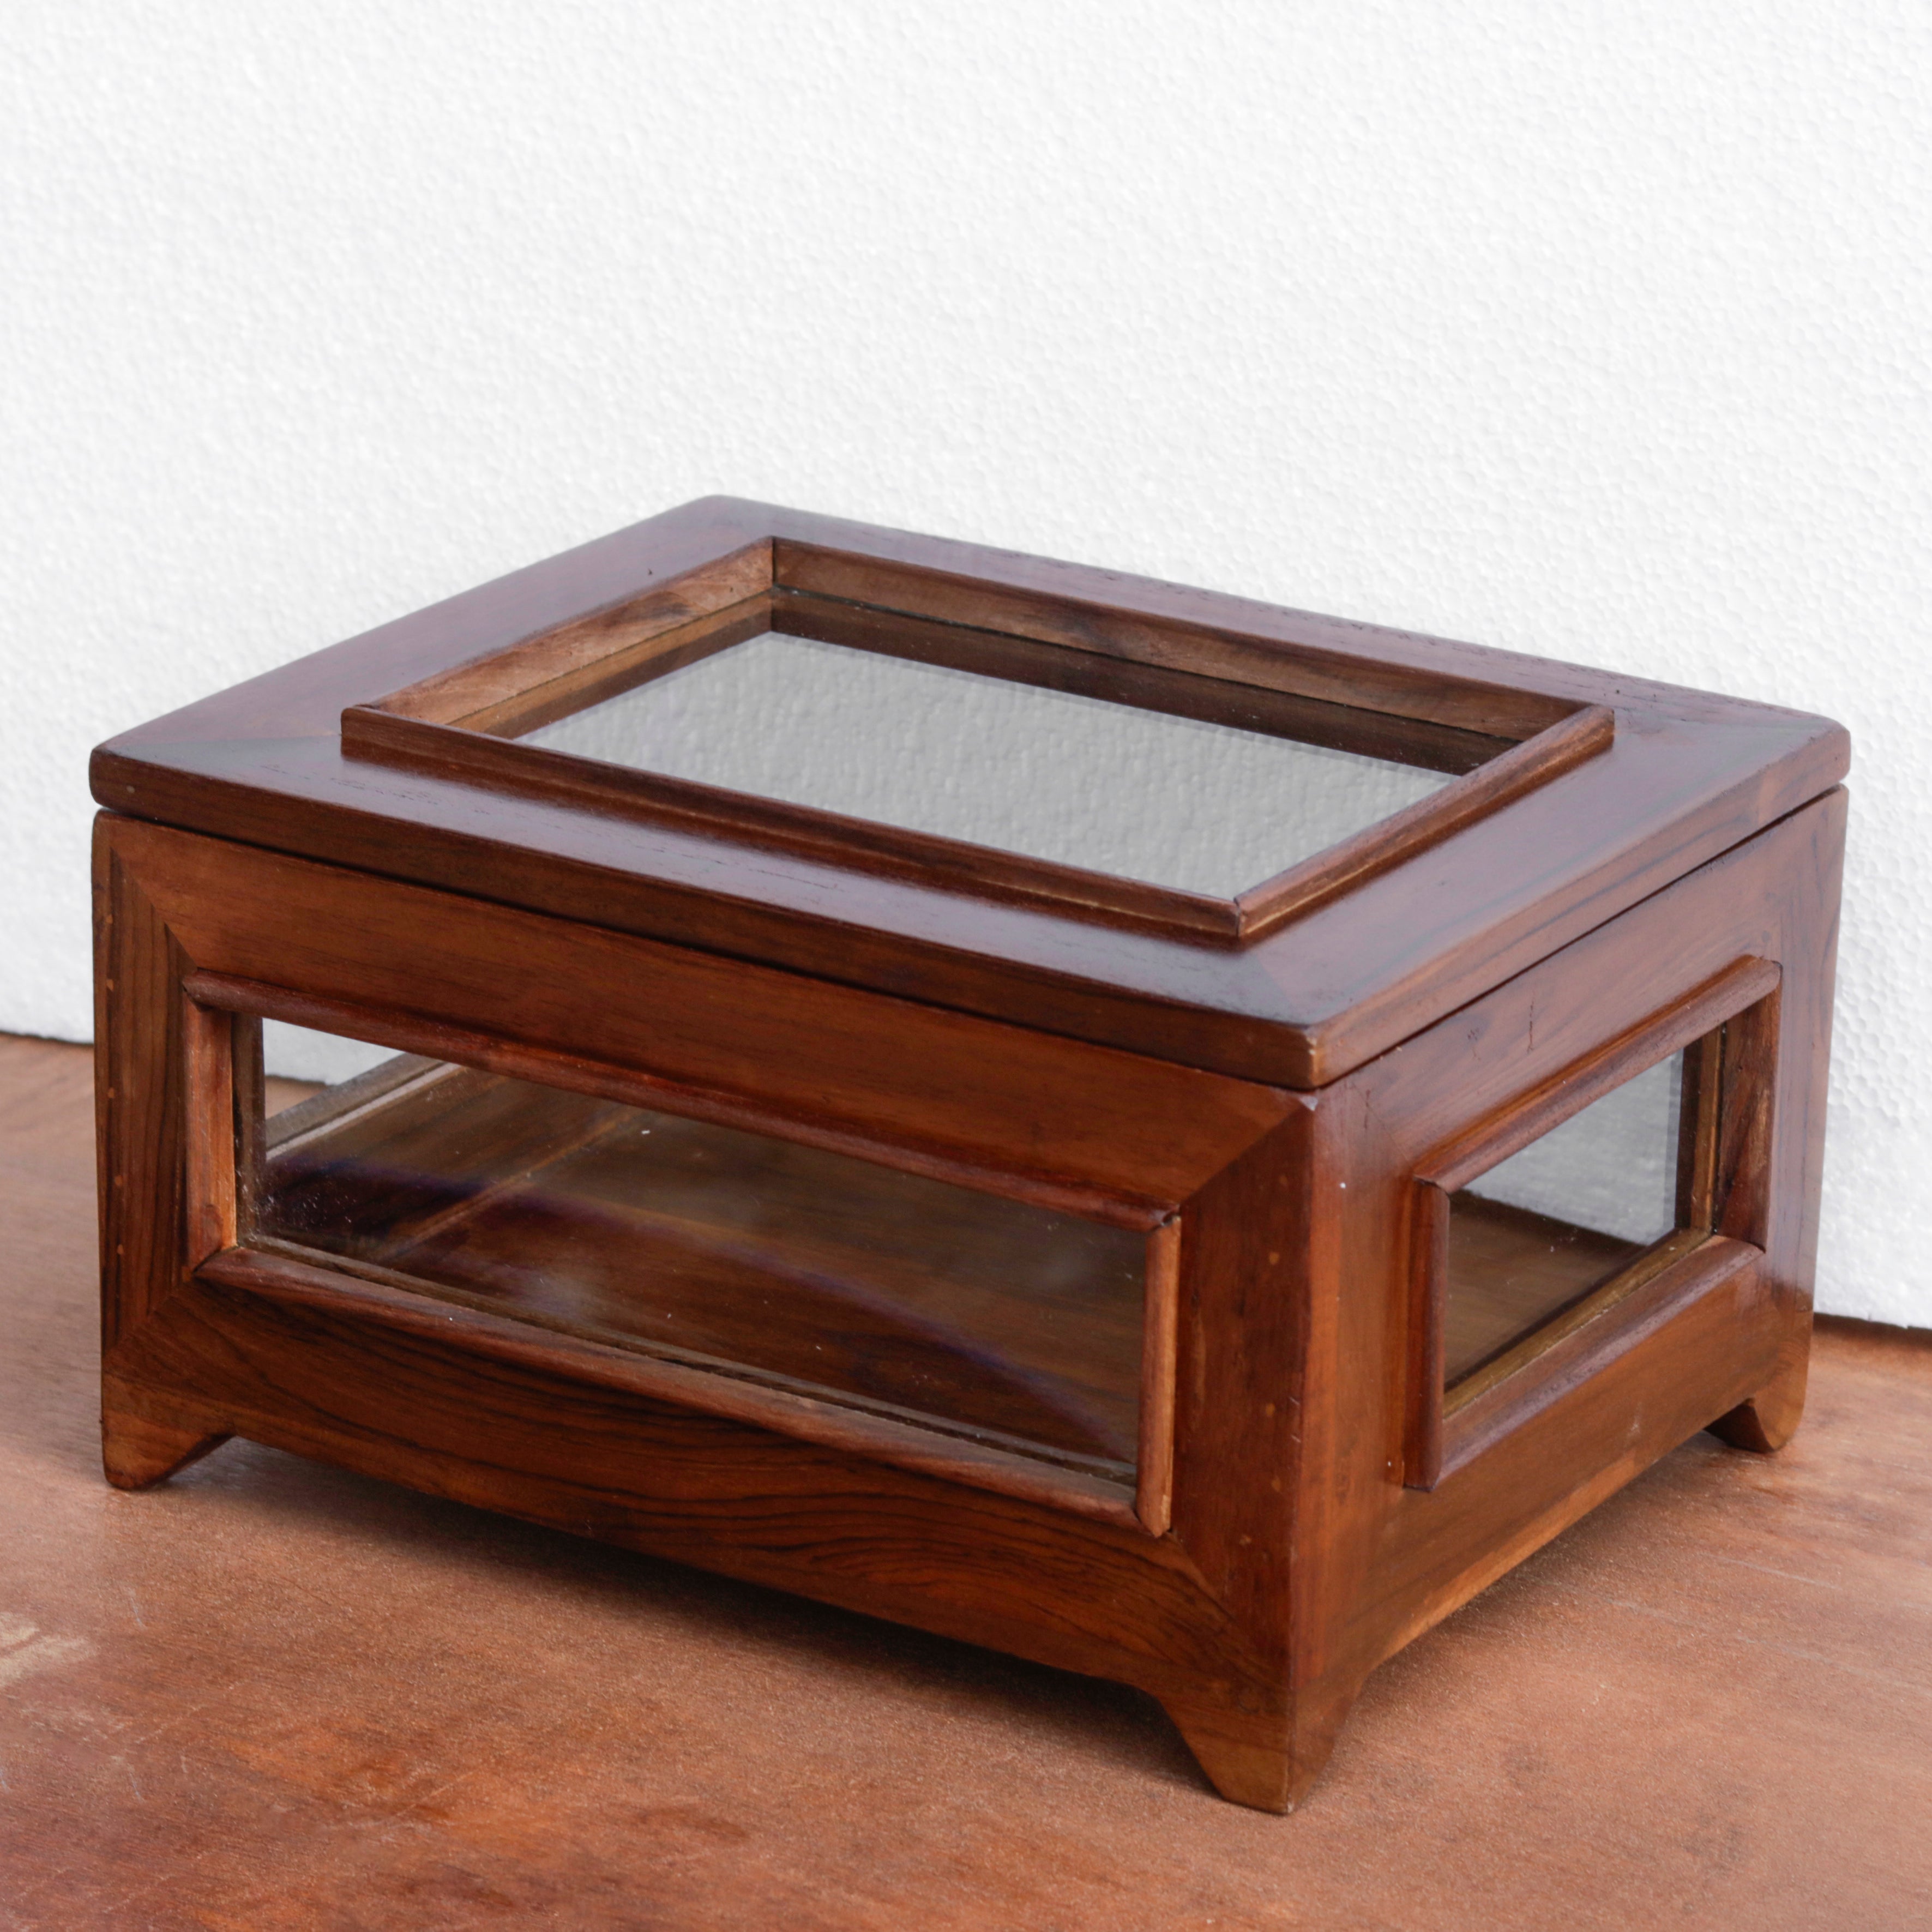 Vintage Transparent Mirror Fitted Wooden Handmade Jewelry Box Wooden Box